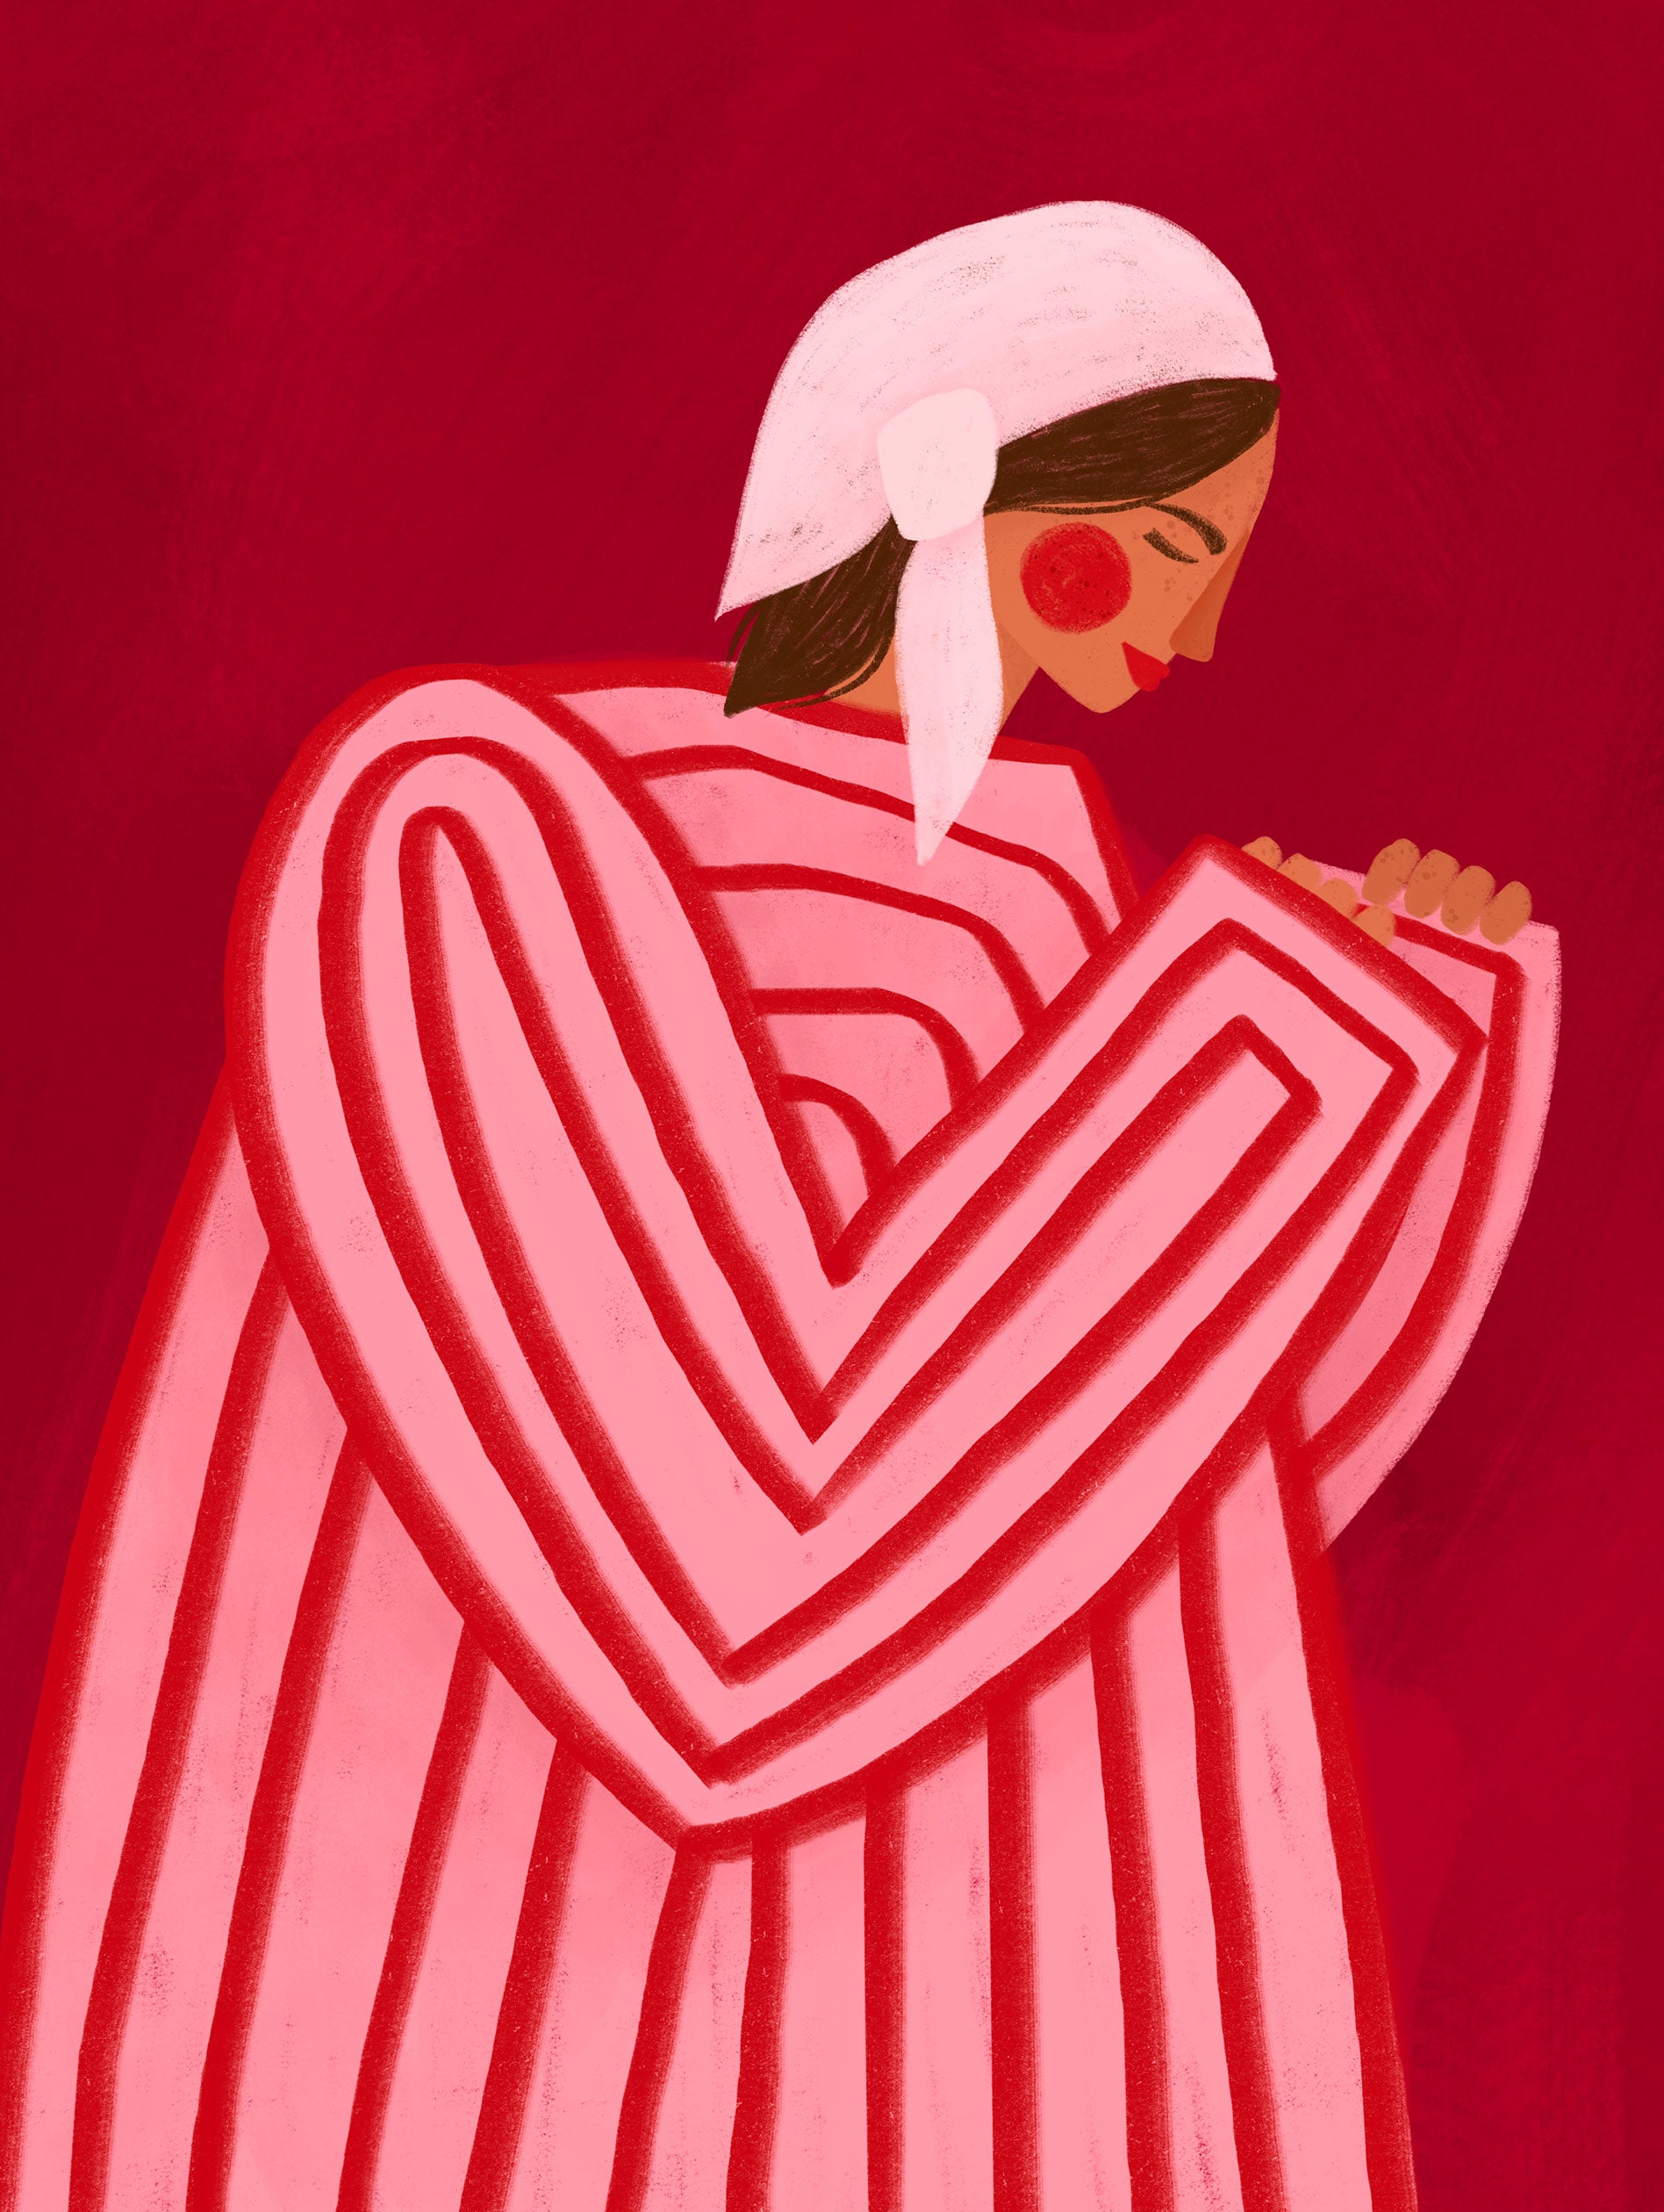 The Woman with the Red Stripes by Bea Muller.